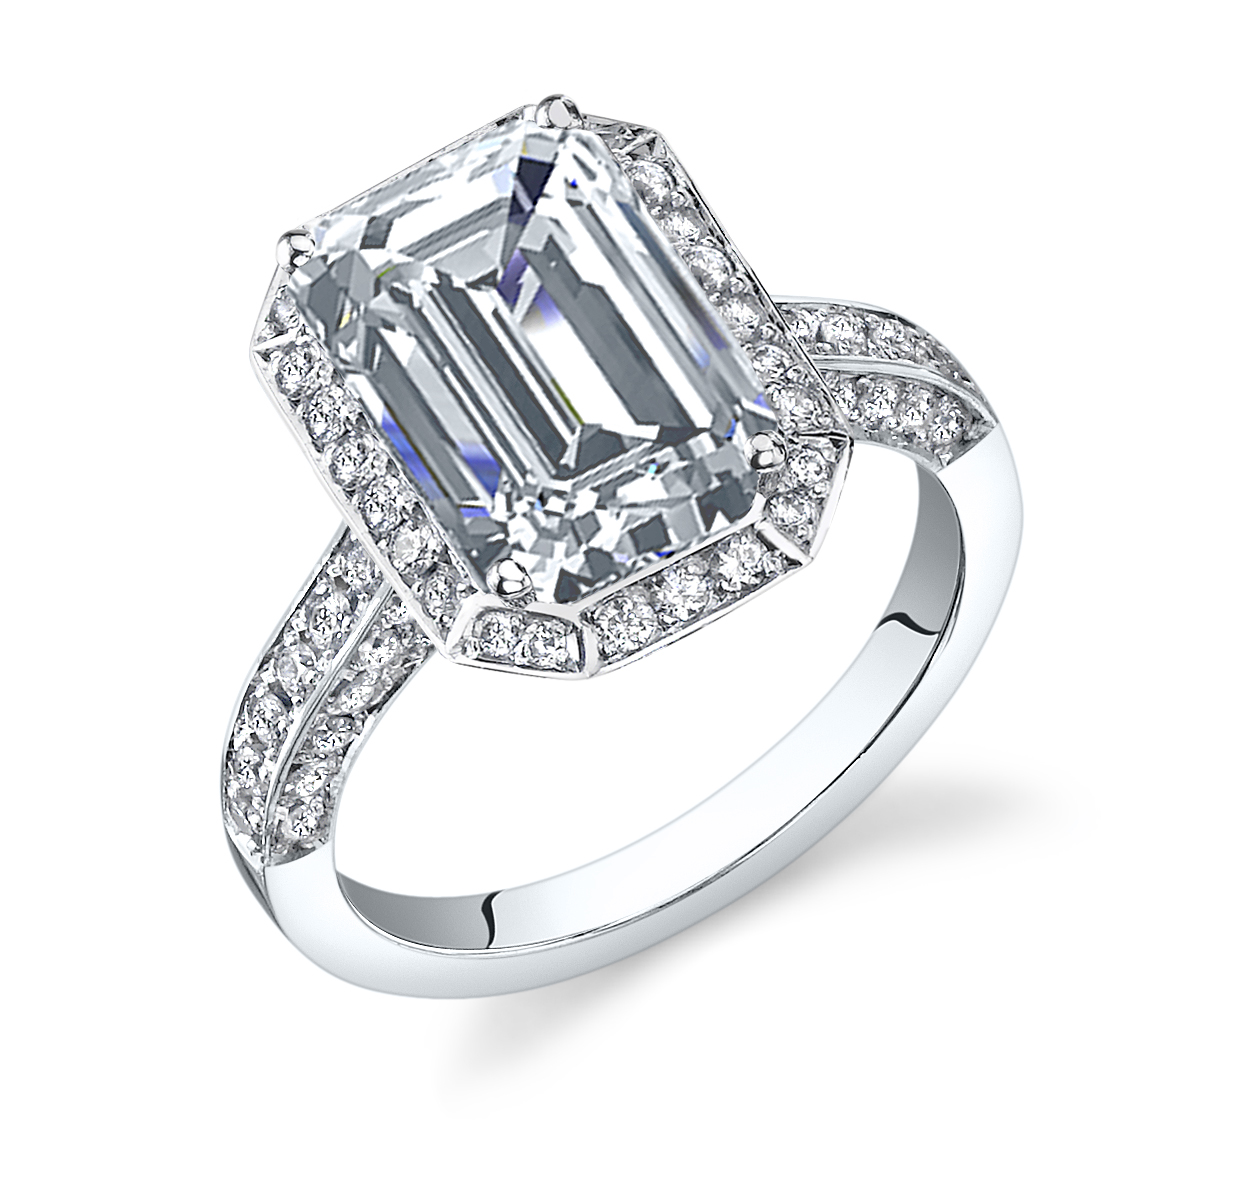 2.2ct. Emerald cut Natural Diamond 3-sided Pave Accent Halo Engagement ...